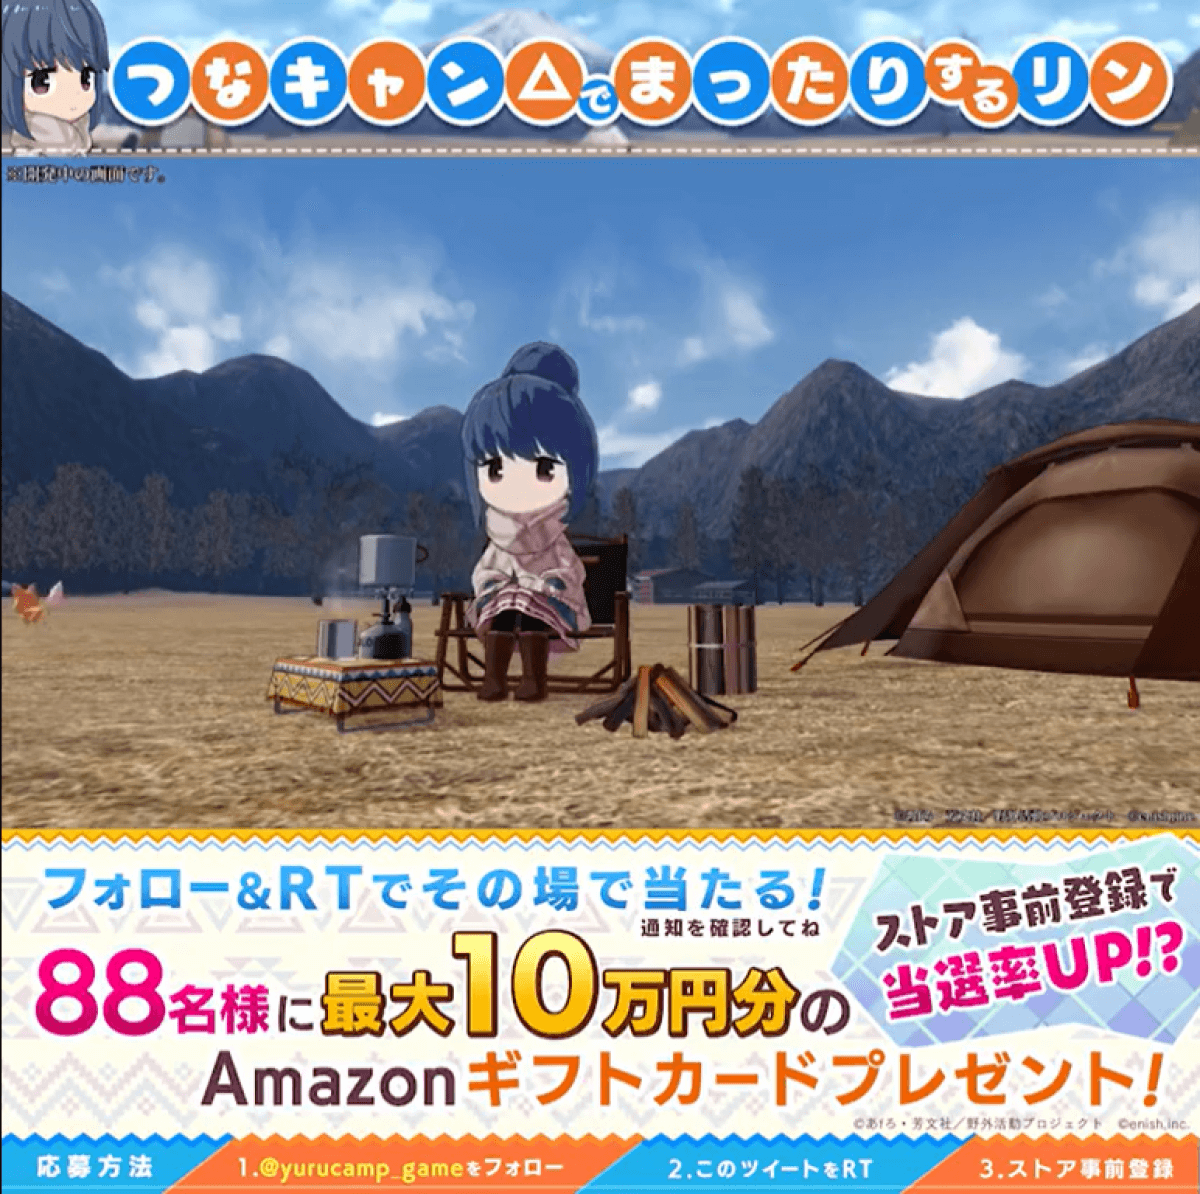 twitter-campaign-yurucamp-game